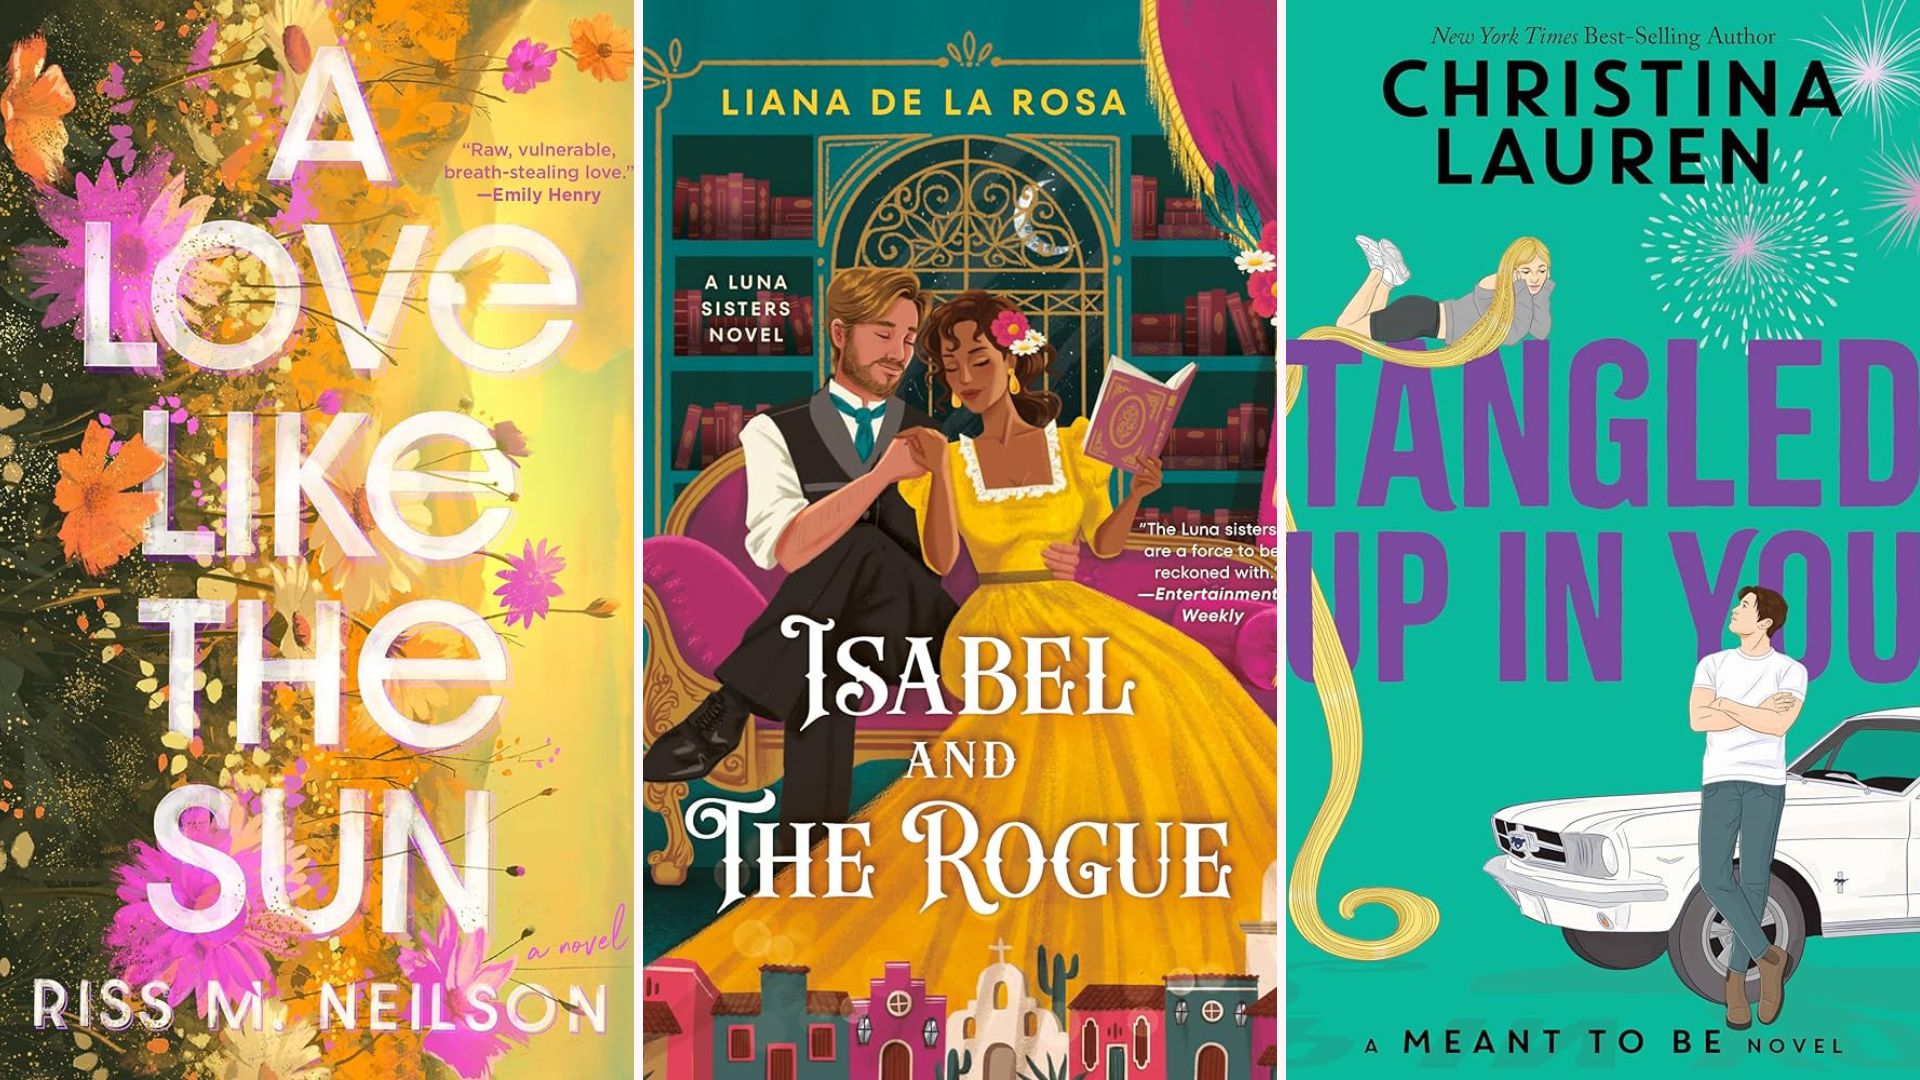 Book covers for A Love Like the Sun, Isabel and the Rogue, and Tangled Up in You